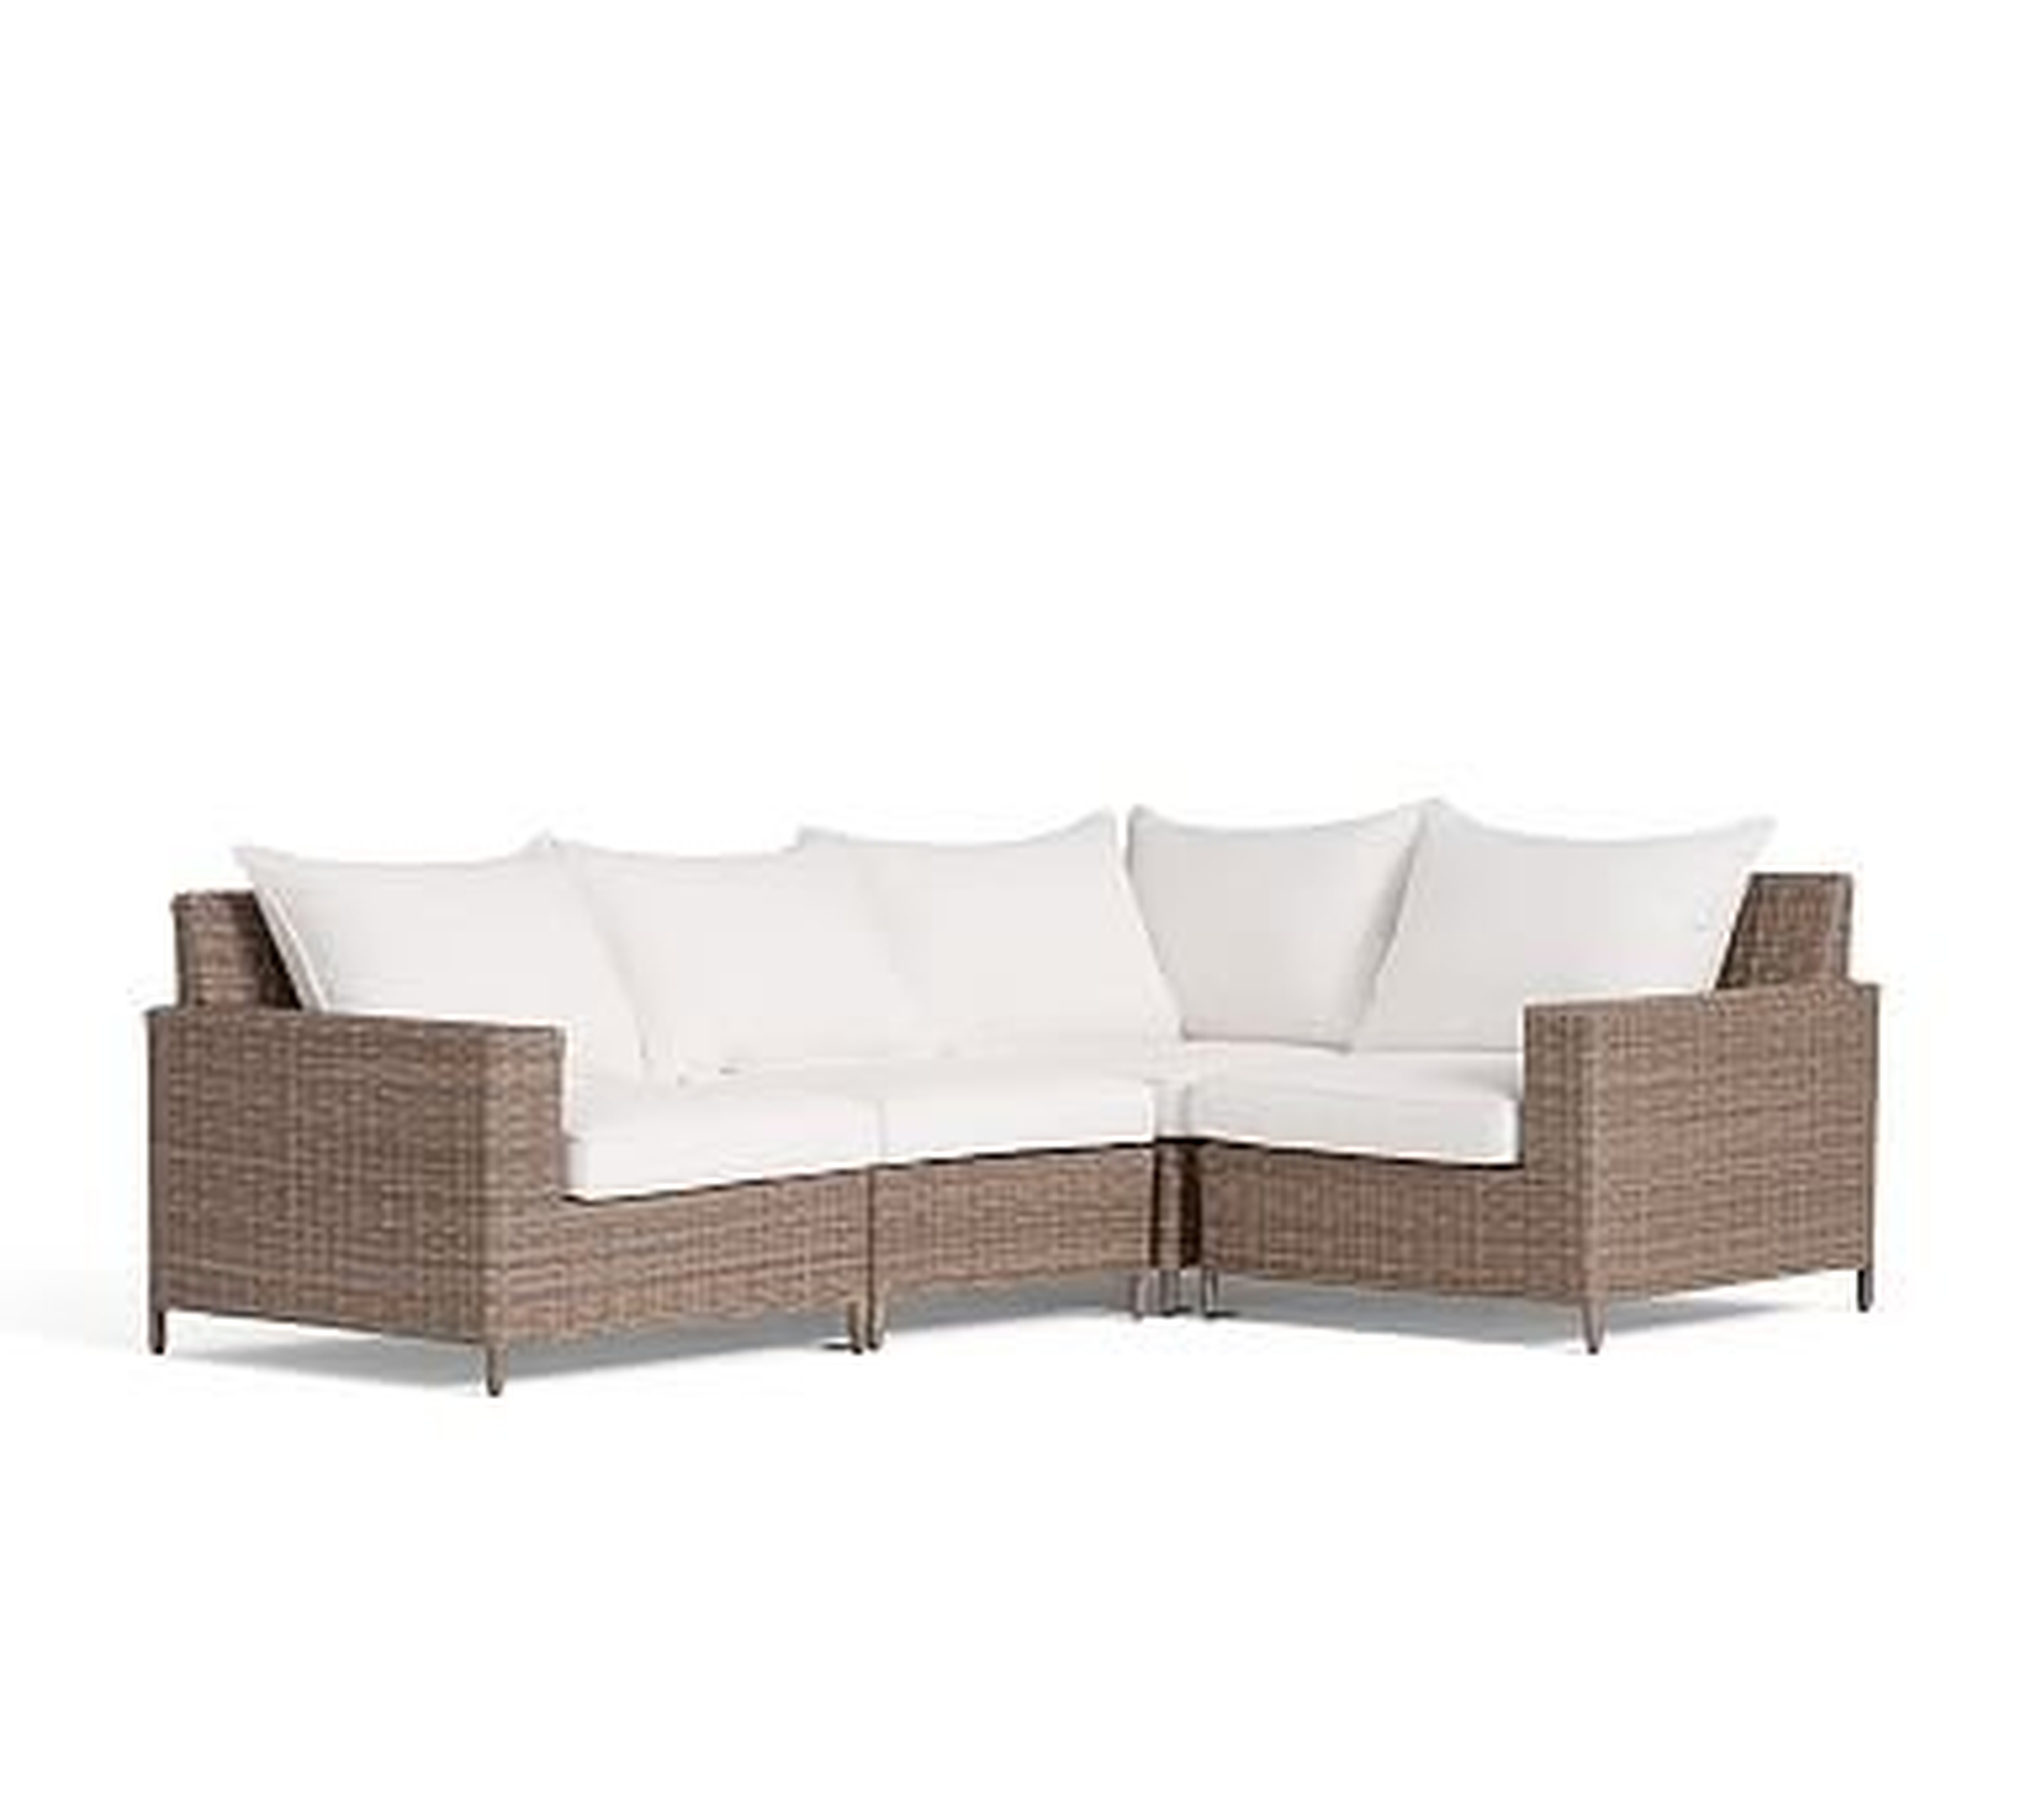 Torrey All-Weather Wicker 4-Piece Square Arm Sectional Frame &amp; Cushion Set (1 Corner + 1 Armless + 1 Left Arm + 1 Right Arm), Natural - Pottery Barn